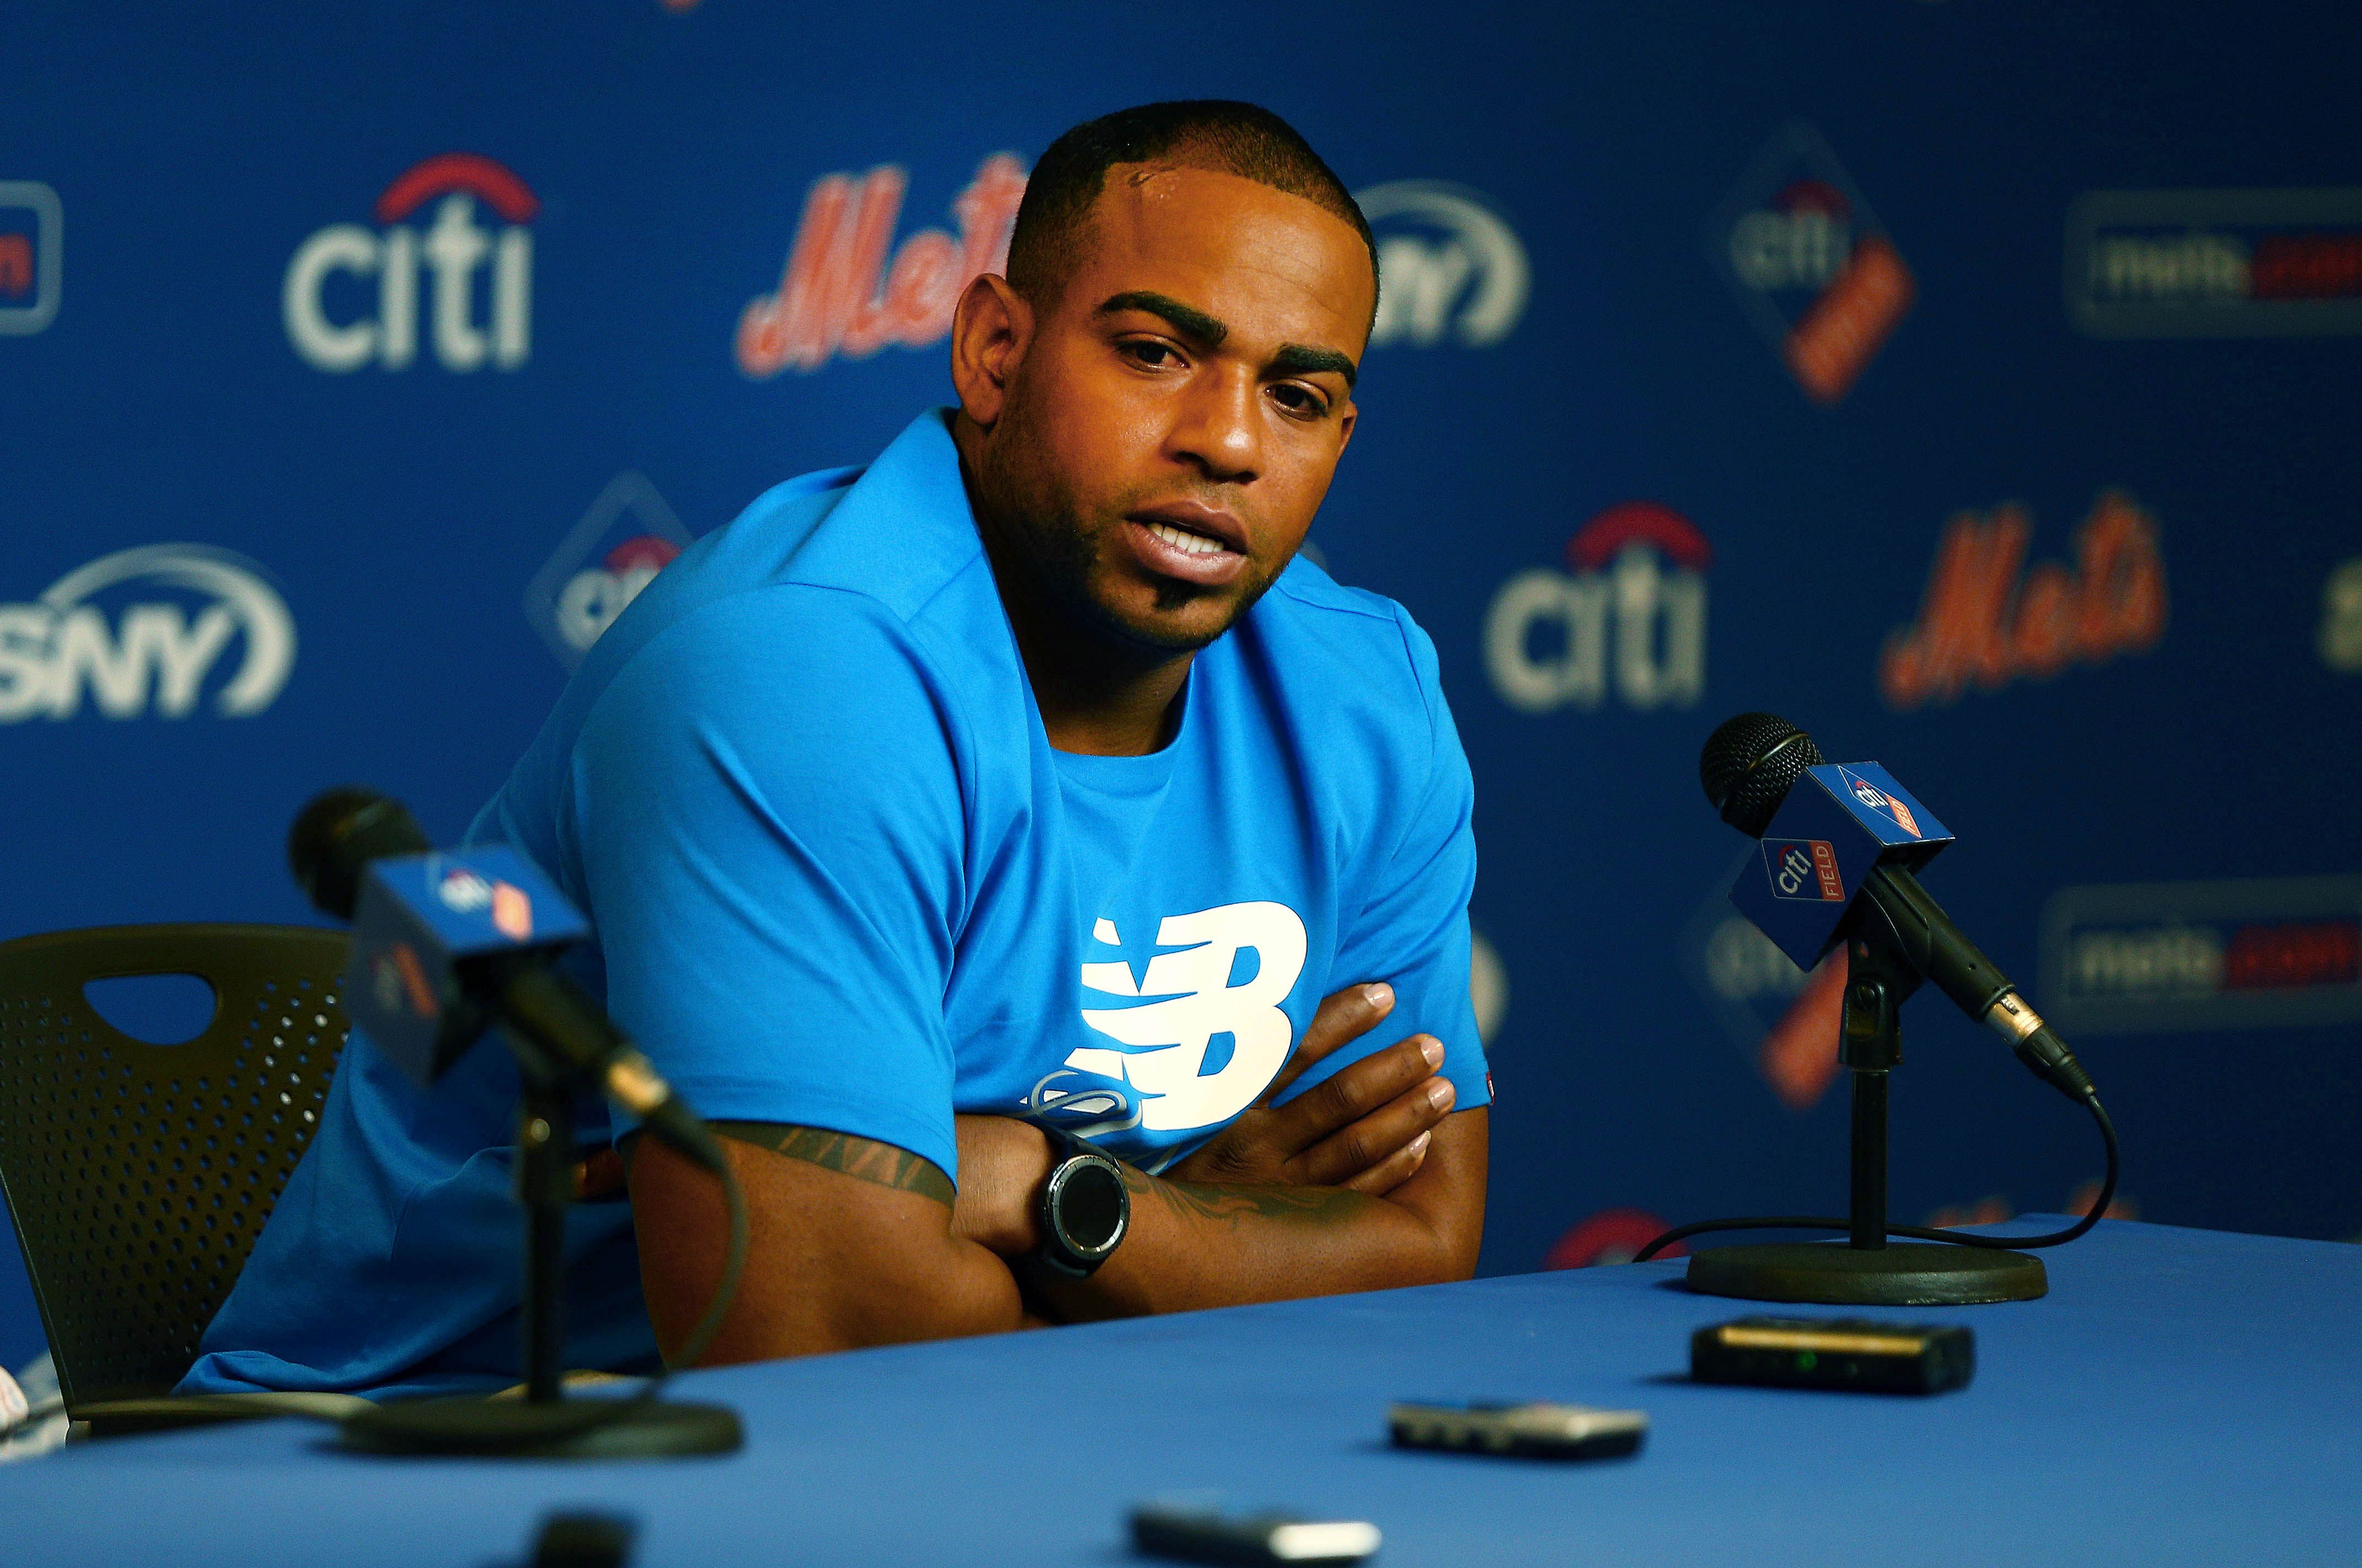 MLB news: Mets, Yoenis Cespedes agree to restructure contract.